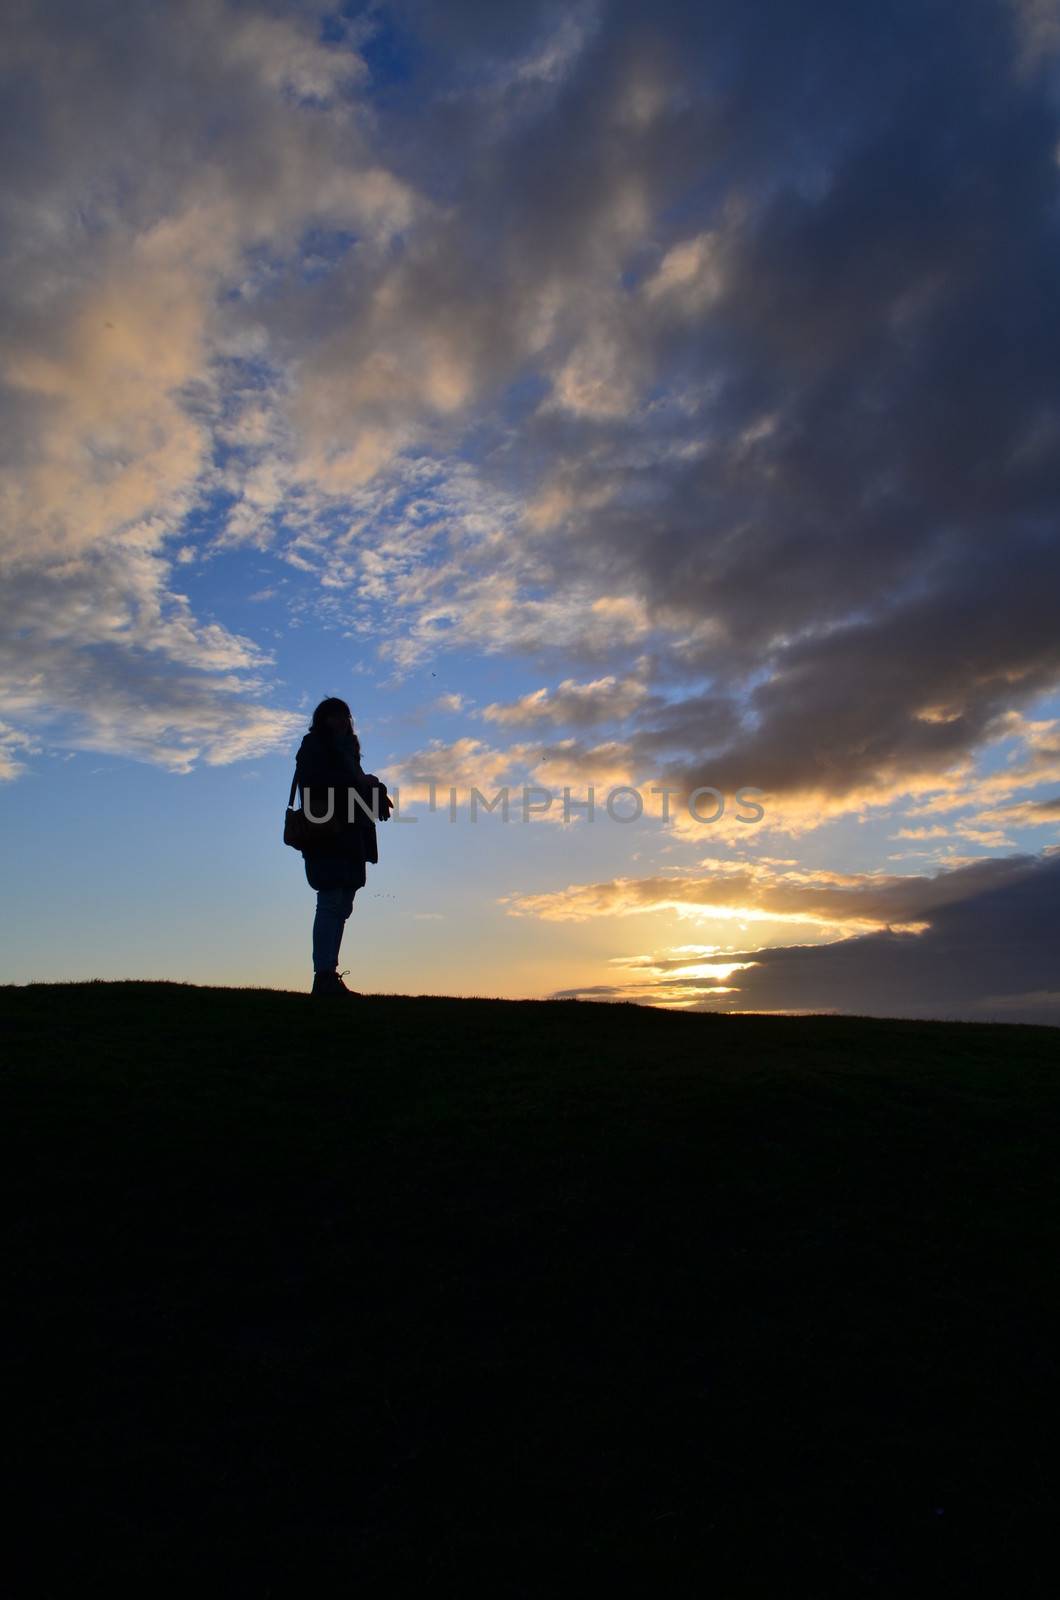 A Woman rambler stands and watches the setting sun.